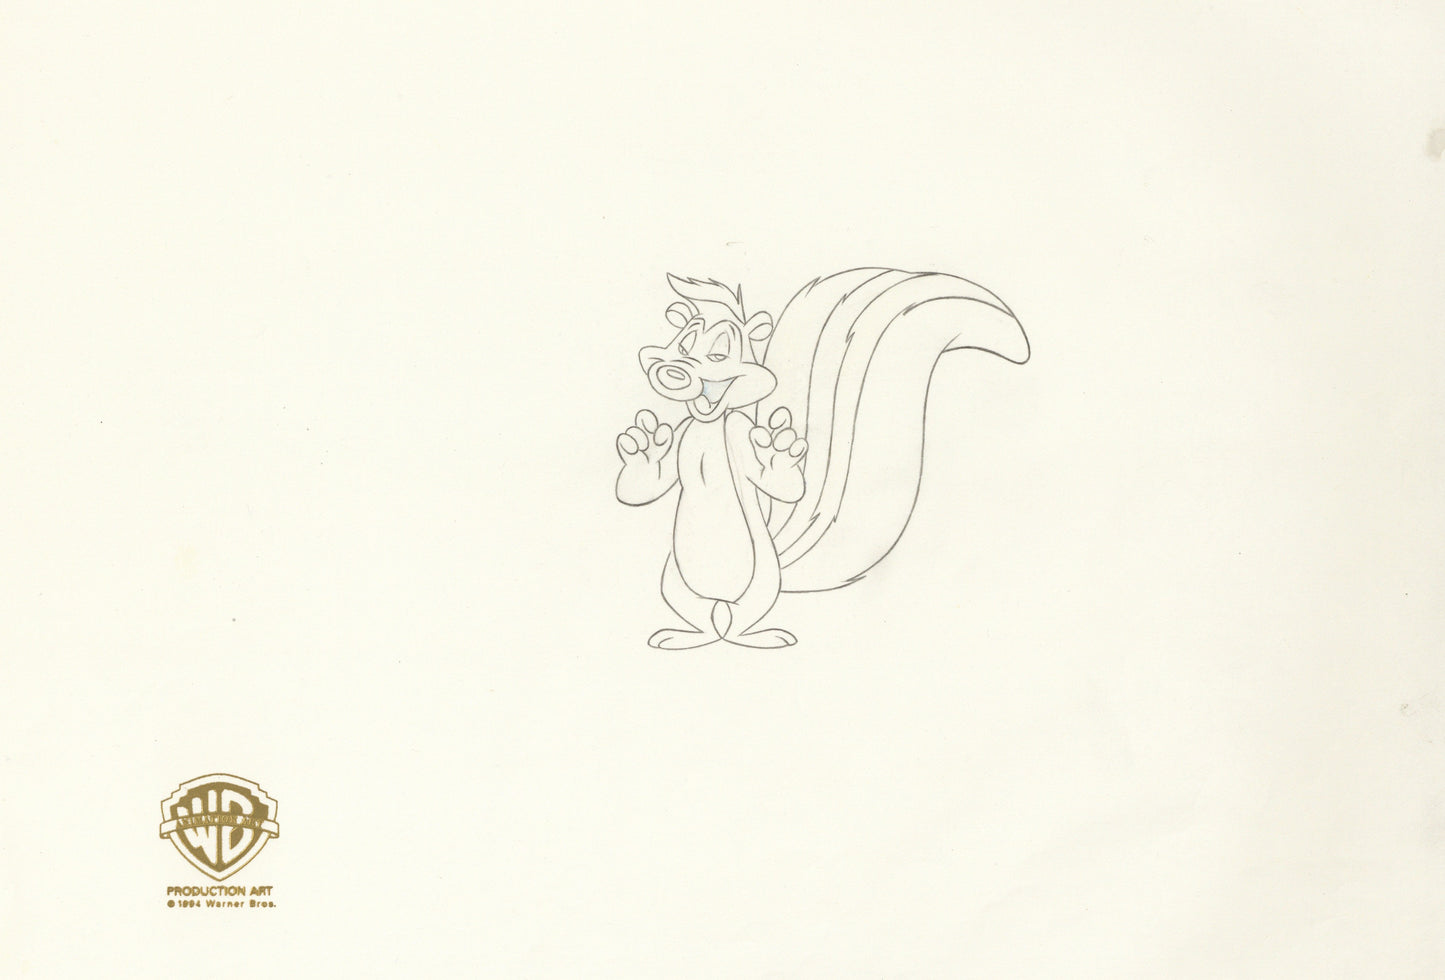 Looney Tunes Original Production Drawing: Pepe Le Pew